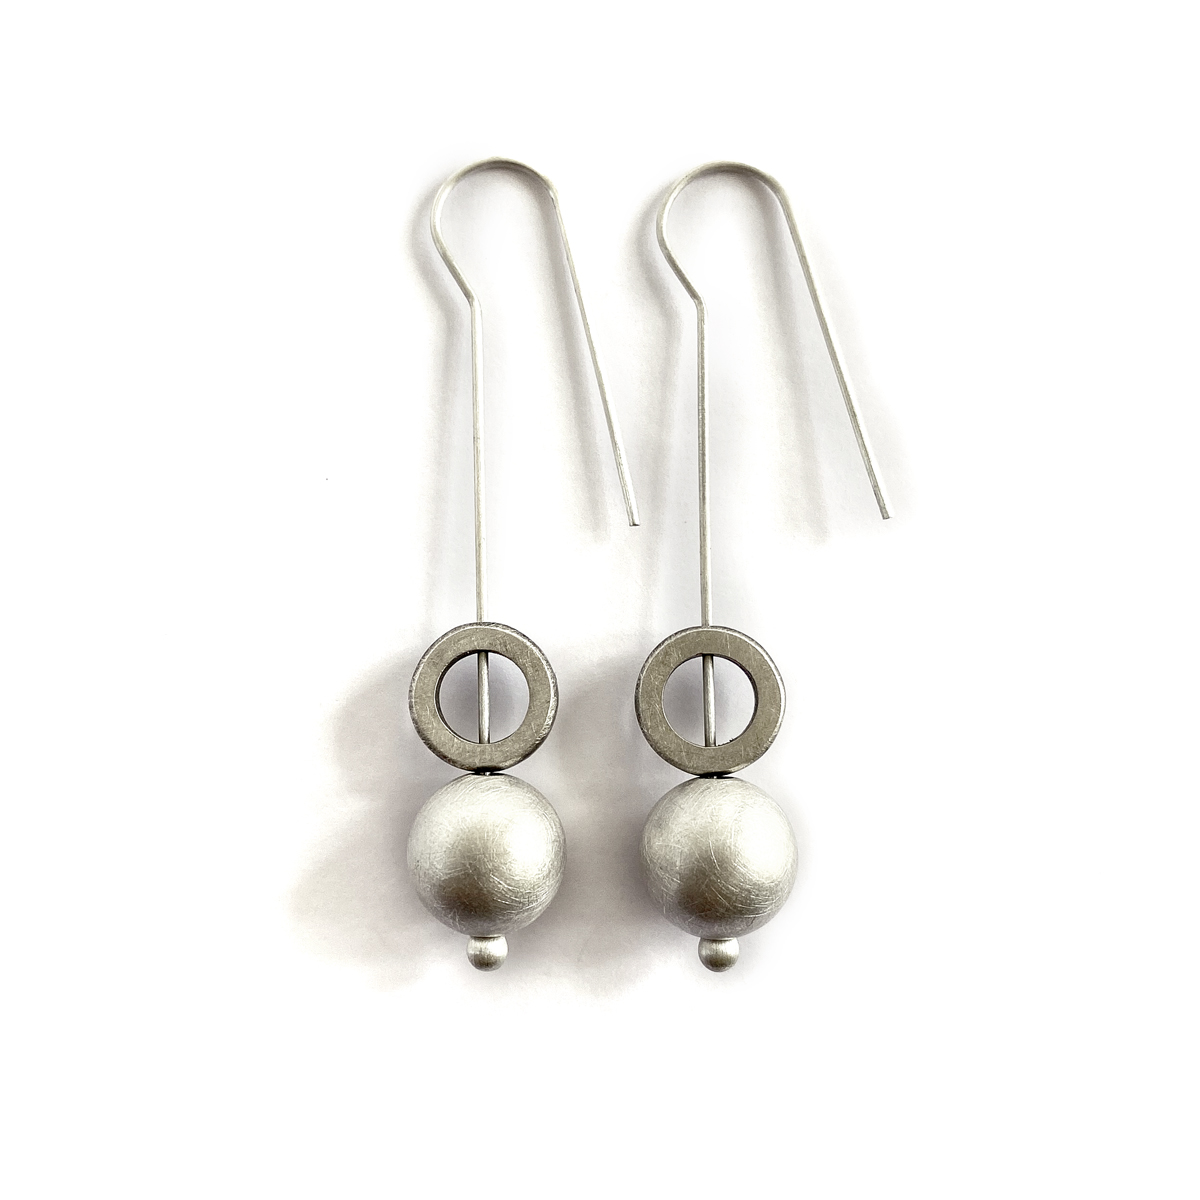 Turning Worlds Earrings, sterling silver, 2020, Kate Alterio